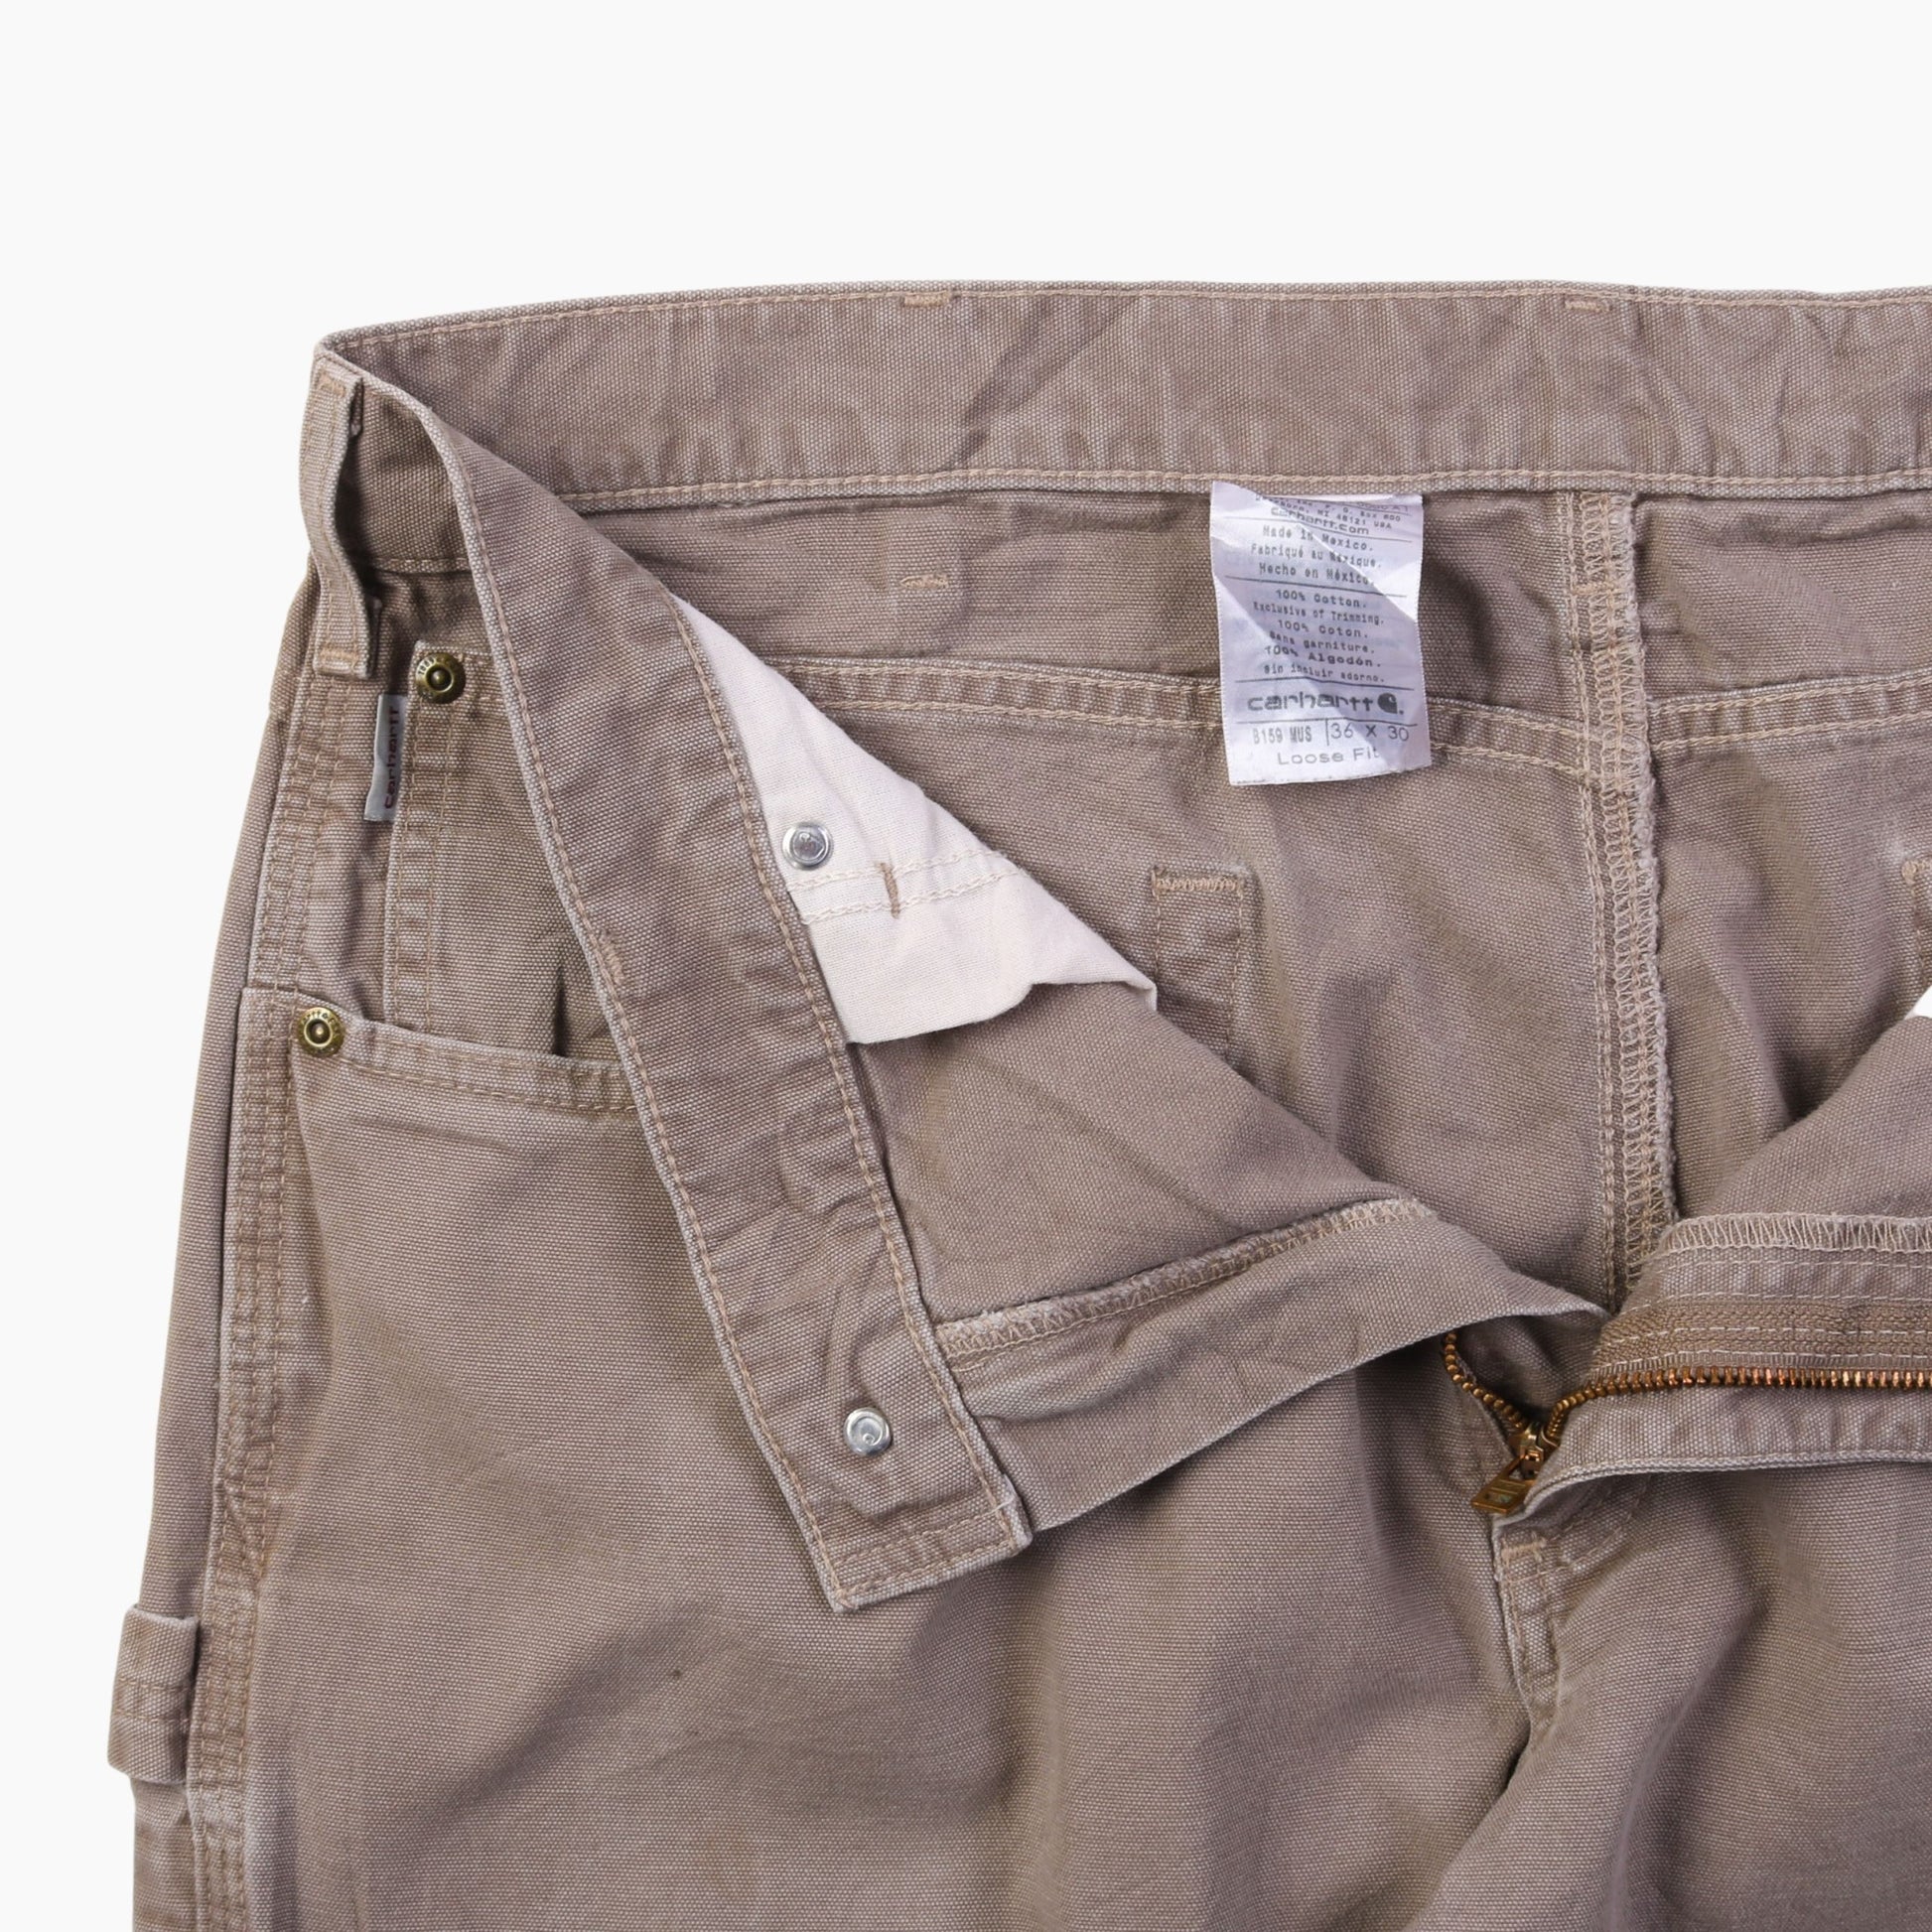 Vintage Carhartt Carpenter Pants - Washed Brown - 36/30 - American Madness